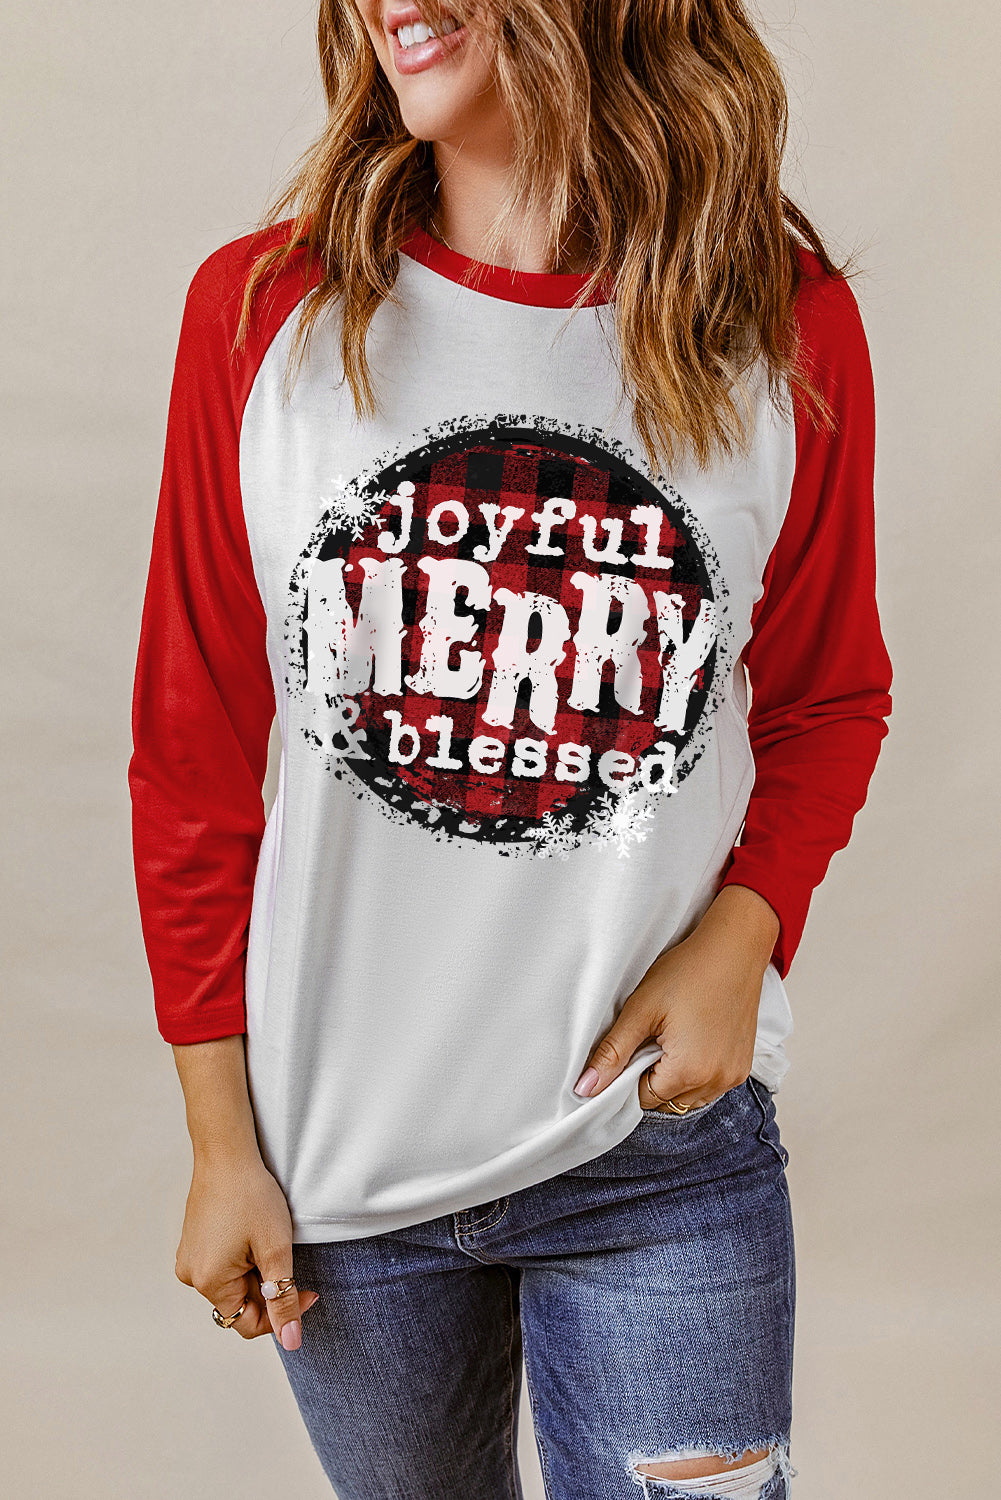 Red Joyful Merry & Blessed Christmas Plaid Pullover Top Item NO: 8617